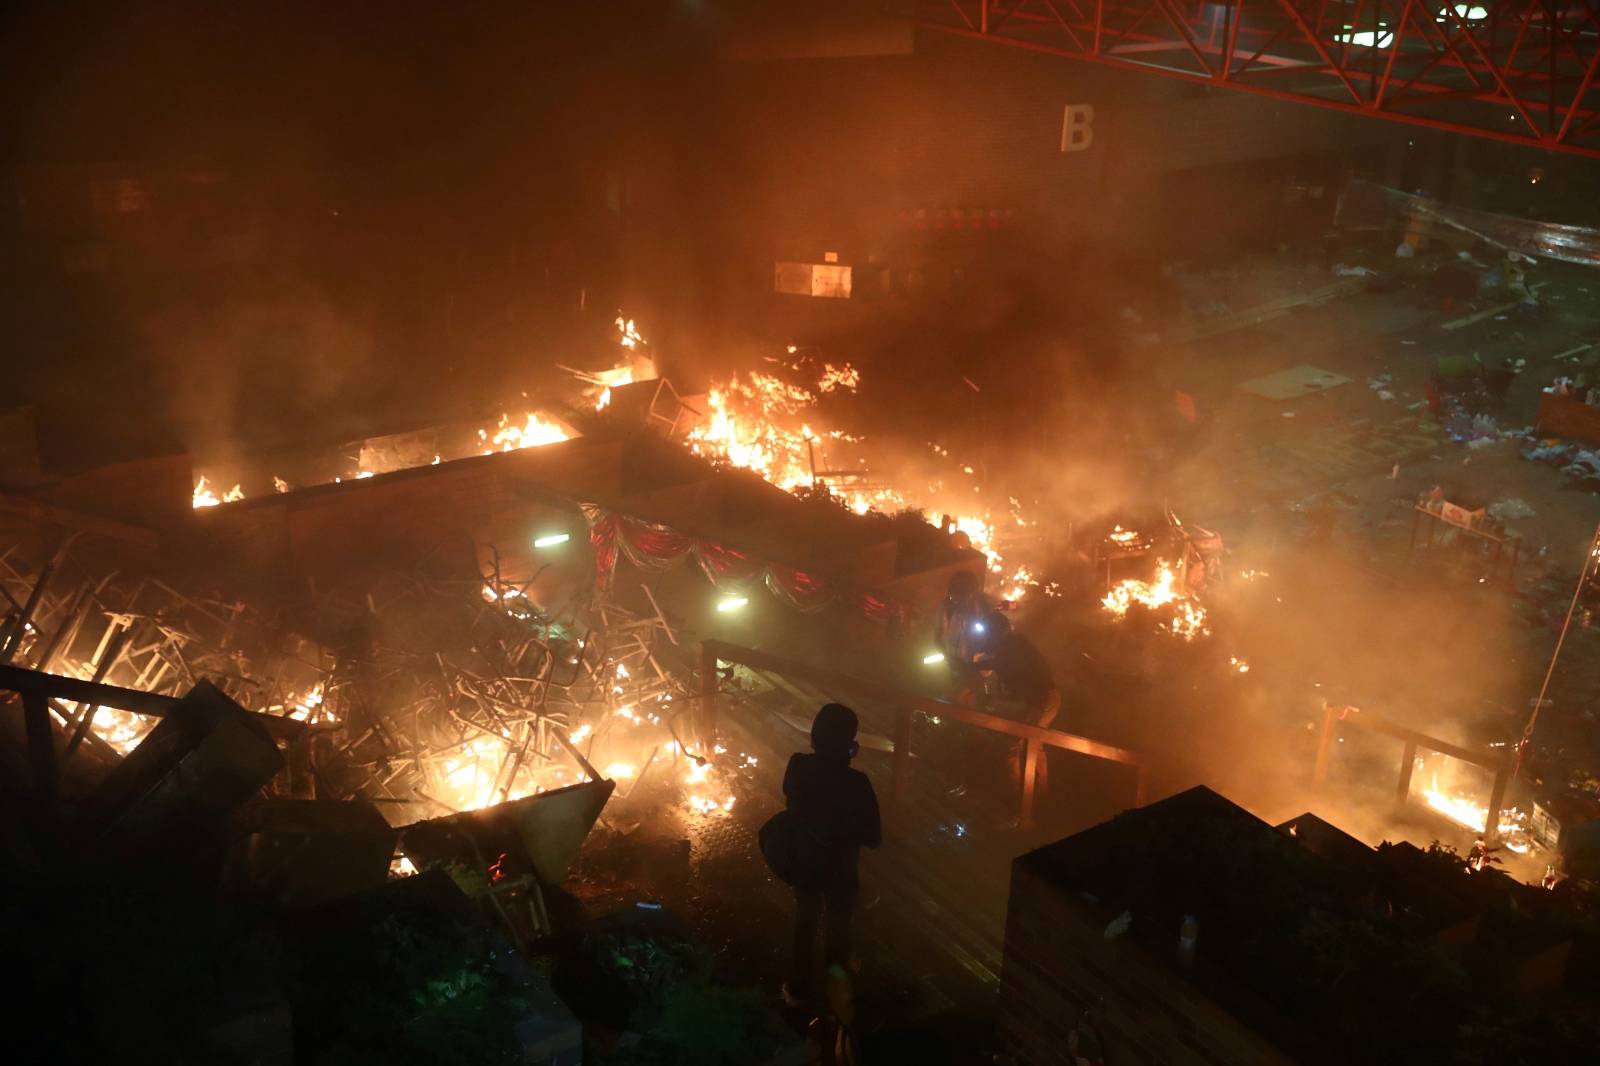 A protester looks at fire at Hong Kong Polytechnic University (PolyU) during an anti-government protest in Hong Kong